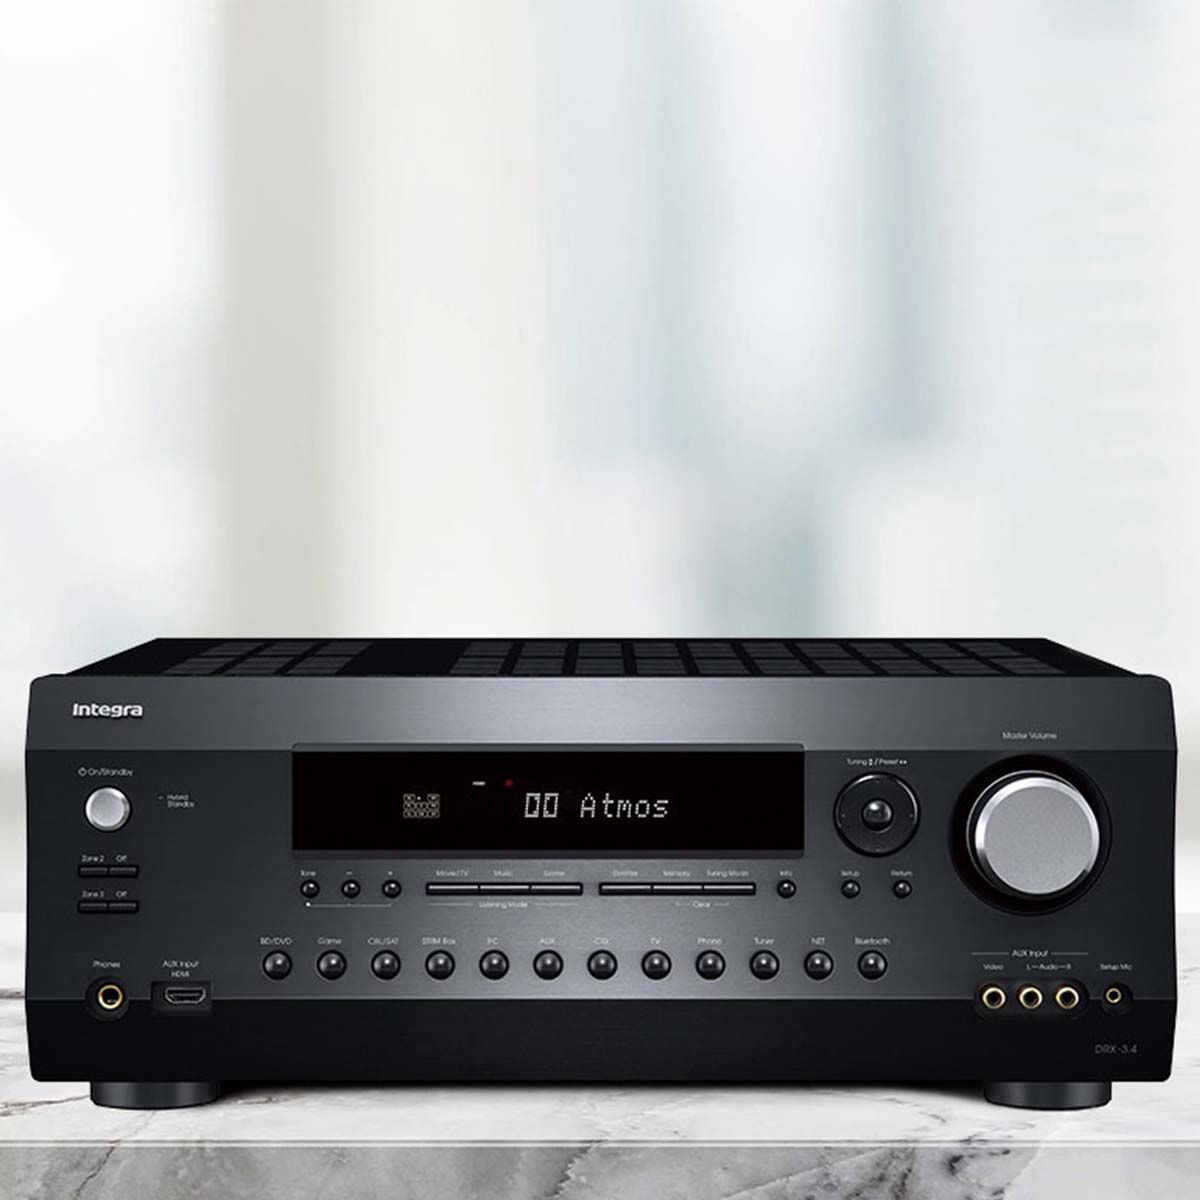 Integra DRX 3.4 Home Theater Receiver, on a marble surface